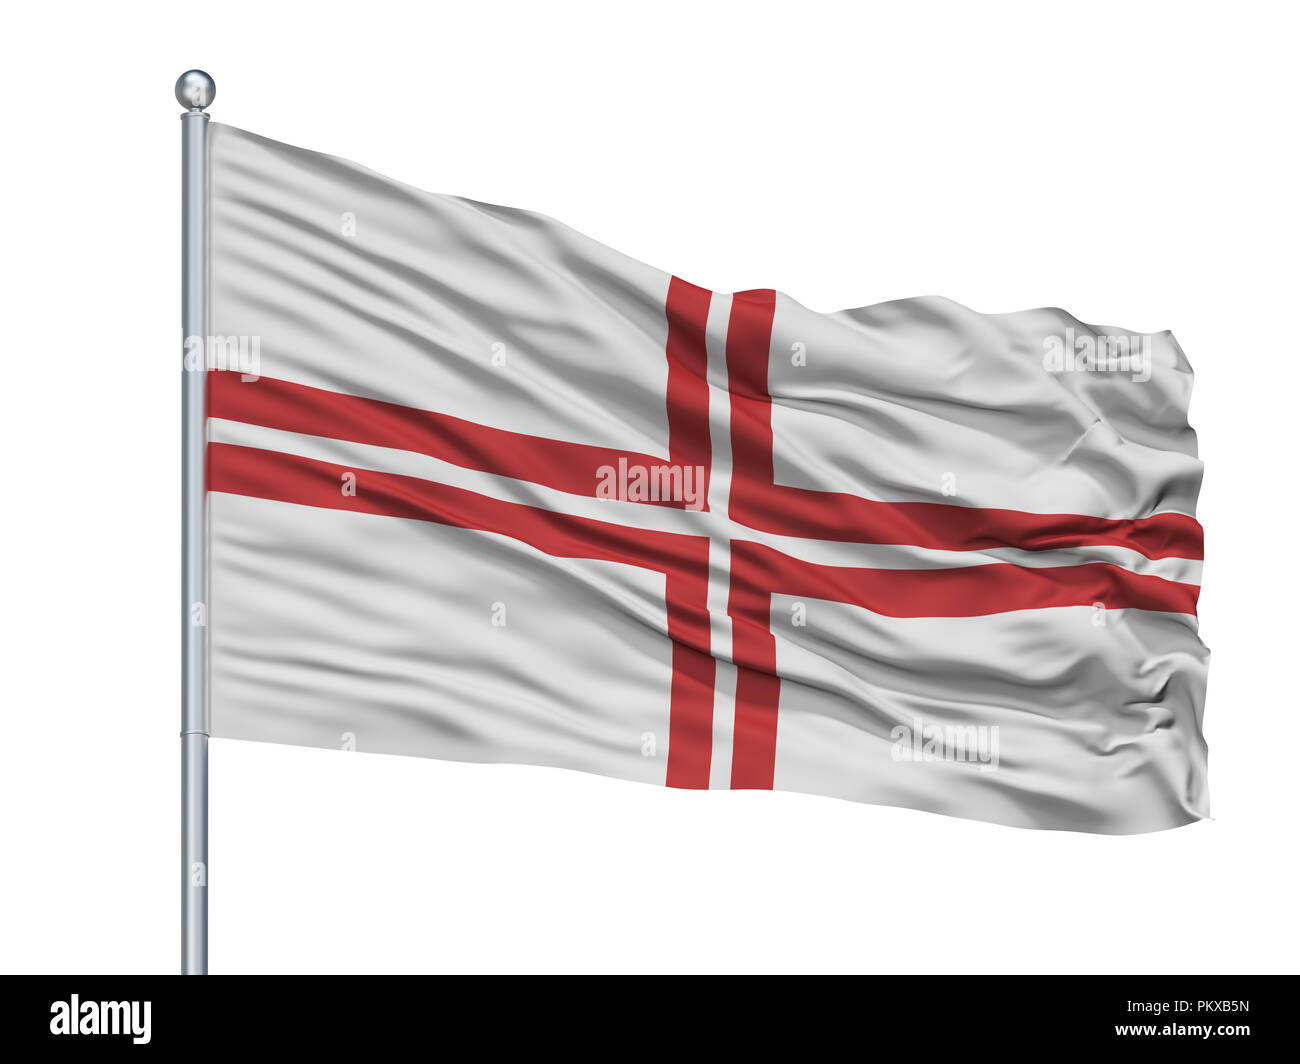 Latvia Naval Ensign Flag On Flagpole, Isolated On White Background, 3D  Rendering Stock Photo - Alamy